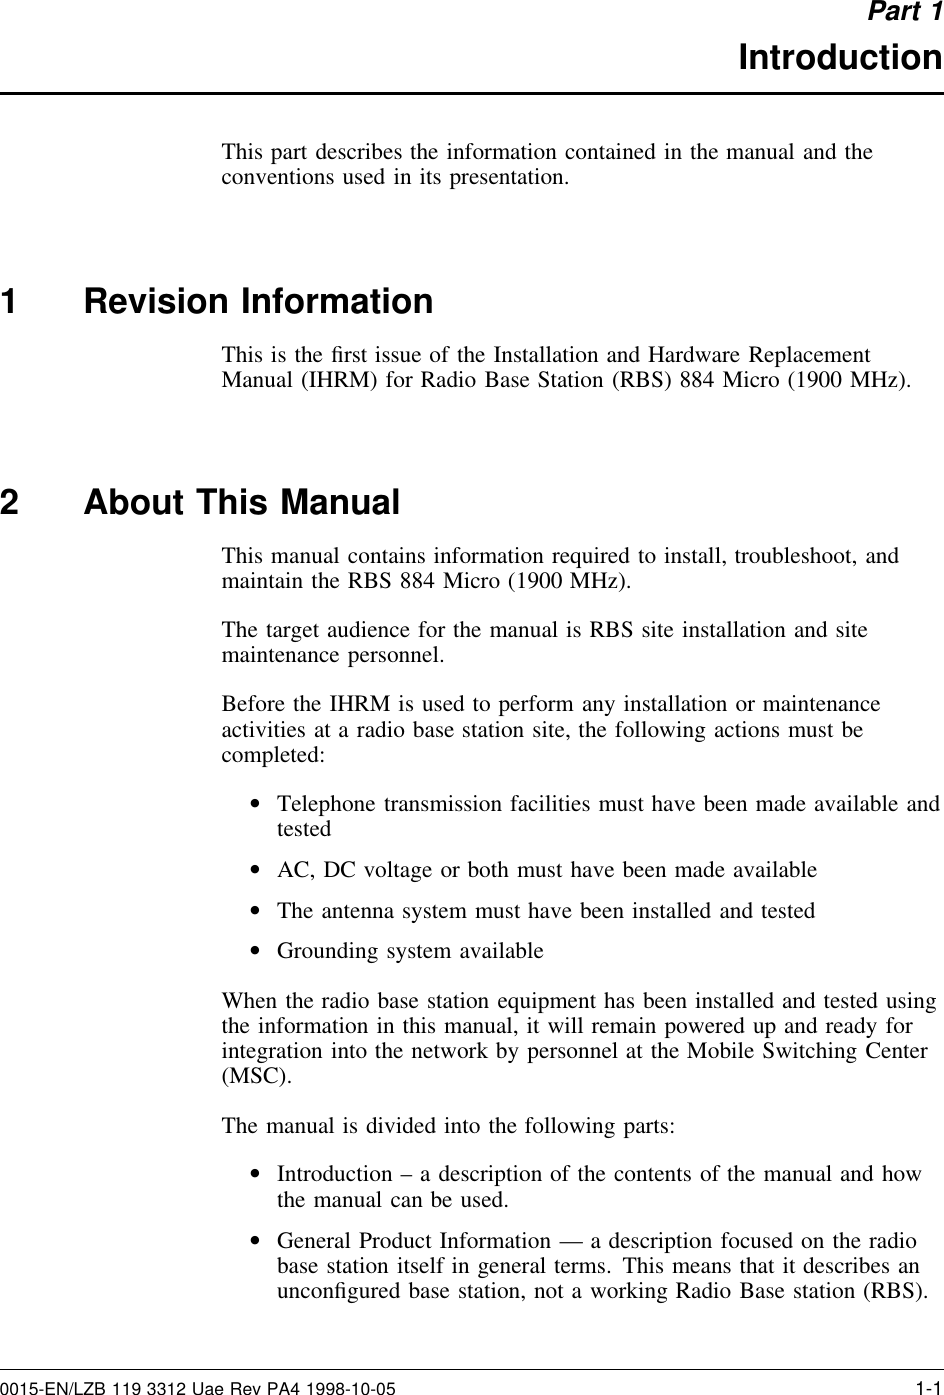 Part 1IntroductionThis part describes the information contained in the manual and theconventions used in its presentation.1 Revision InformationThis is the ﬁrst issue of the Installation and Hardware ReplacementManual (IHRM) for Radio Base Station (RBS) 884 Micro (1900 MHz).2 About This ManualThis manual contains information required to install, troubleshoot, andmaintain the RBS 884 Micro (1900 MHz).The target audience for the manual is RBS site installation and sitemaintenance personnel.Before the IHRM is used to perform any installation or maintenanceactivities at a radio base station site, the following actions must becompleted:•Telephone transmission facilities must have been made available andtested•AC, DC voltage or both must have been made available•The antenna system must have been installed and tested•Grounding system availableWhen the radio base station equipment has been installed and tested usingthe information in this manual, it will remain powered up and ready forintegration into the network by personnel at the Mobile Switching Center(MSC).The manual is divided into the following parts:•Introduction – a description of the contents of the manual and howthe manual can be used.•General Product Information — a description focused on the radiobase station itself in general terms. This means that it describes anunconﬁgured base station, not a working Radio Base station (RBS).0015-EN/LZB 119 3312 Uae Rev PA4 1998-10-05 1-1